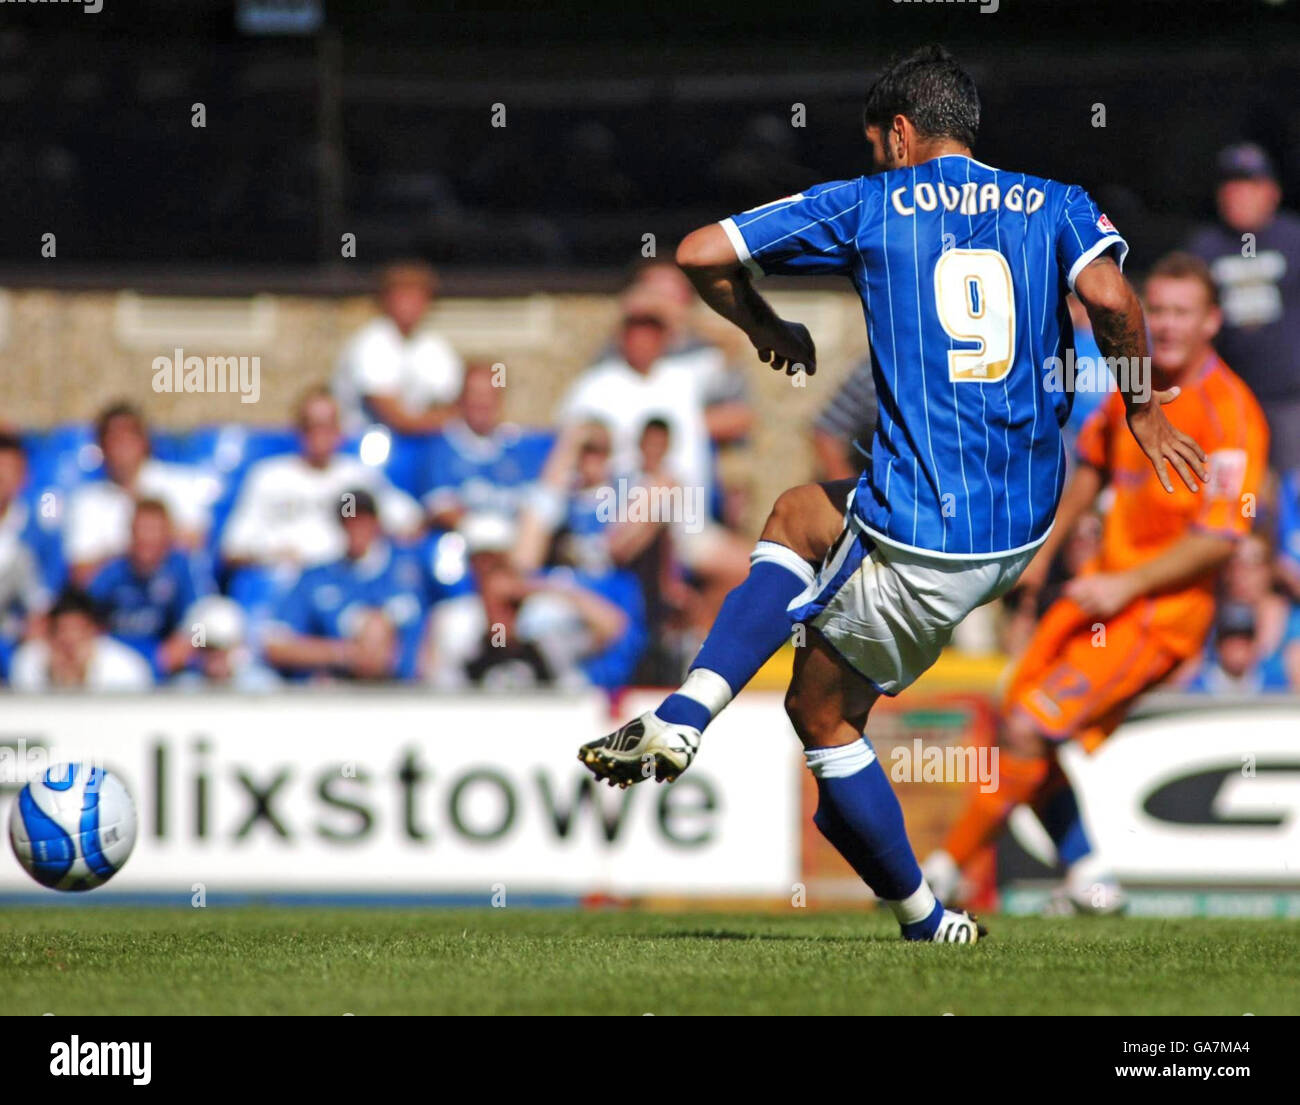 Ipswich Town's Pablo Counago scores the fourth goal of the game during the Coca-Cola Football League Championship match at Portman Road, Ipswich. Stock Photo